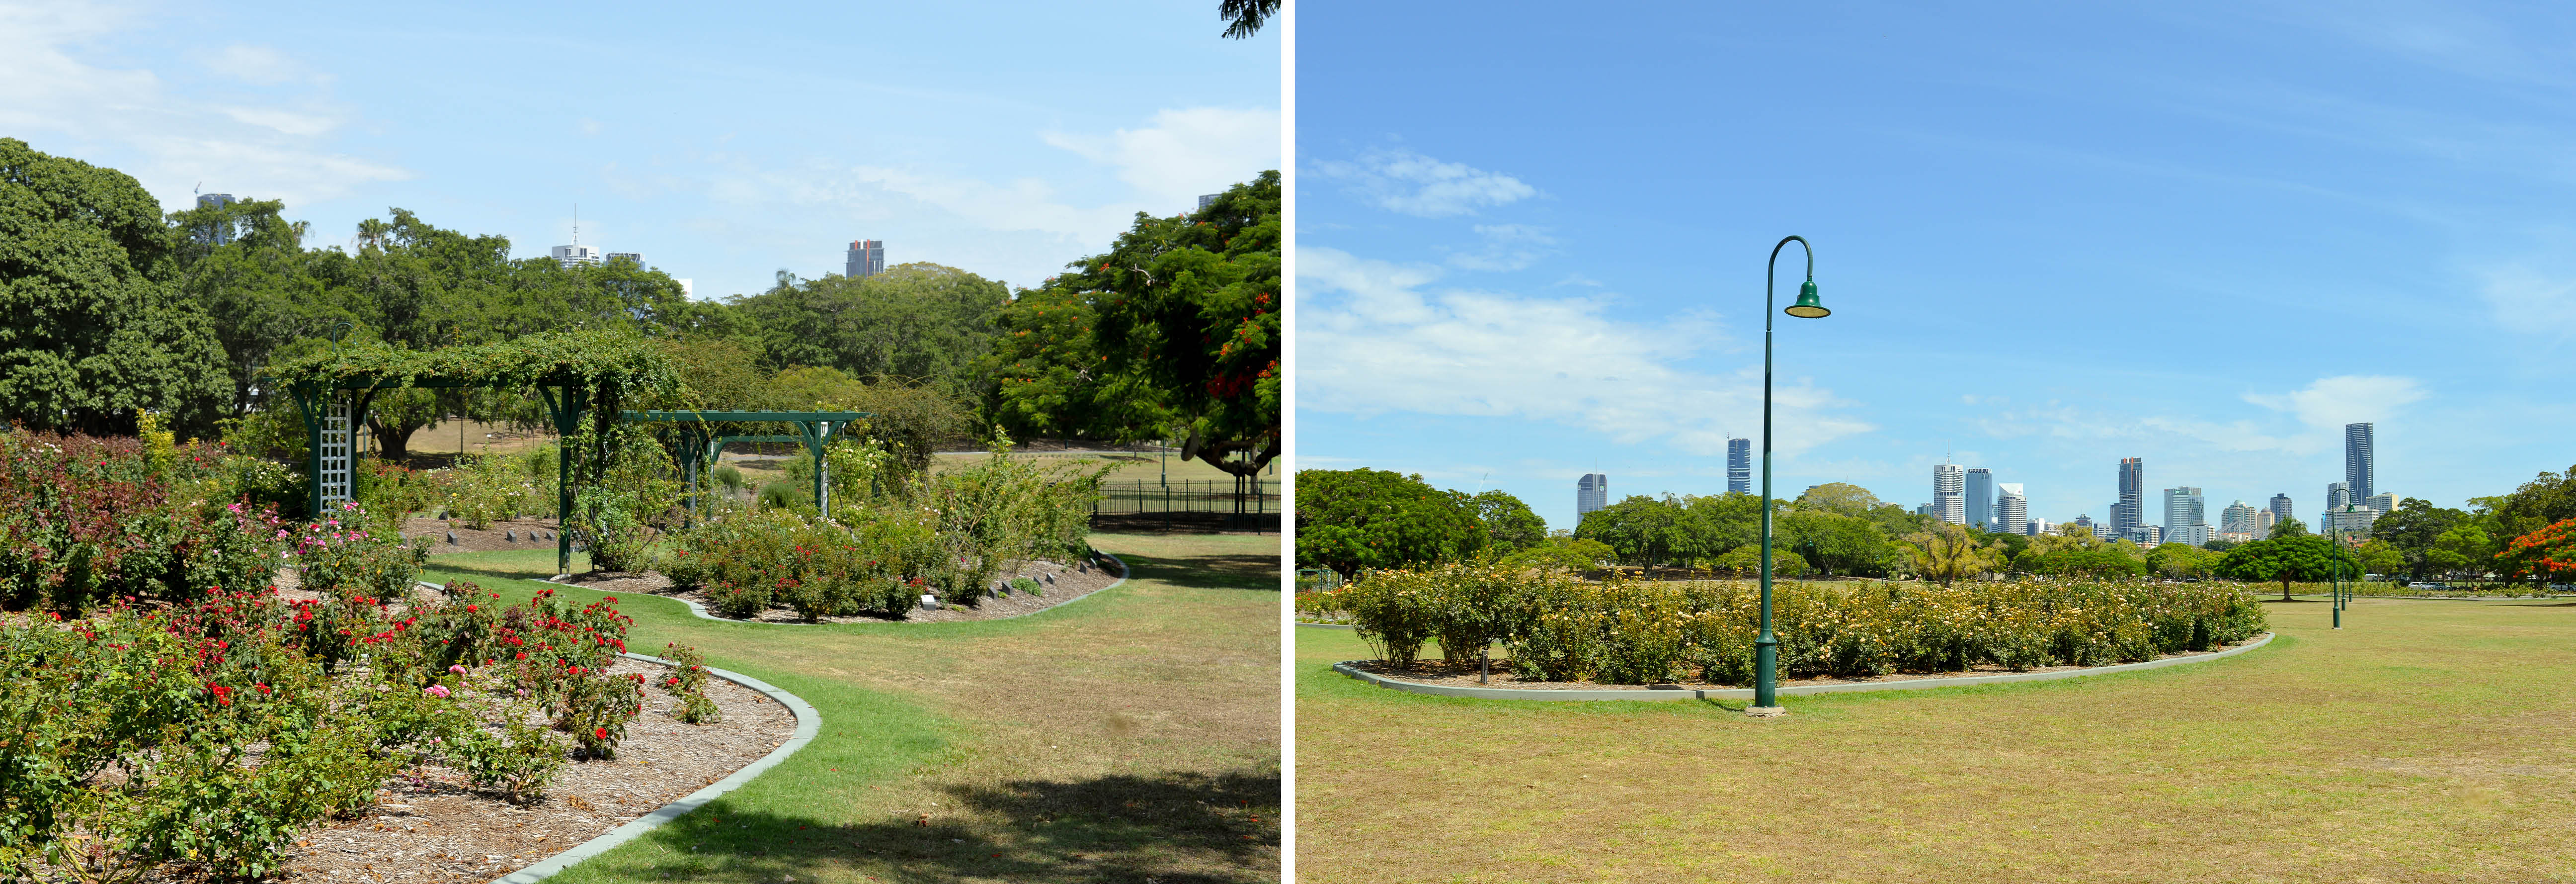 New Farm Park rose garden and views over the park to the Brisbane skyline